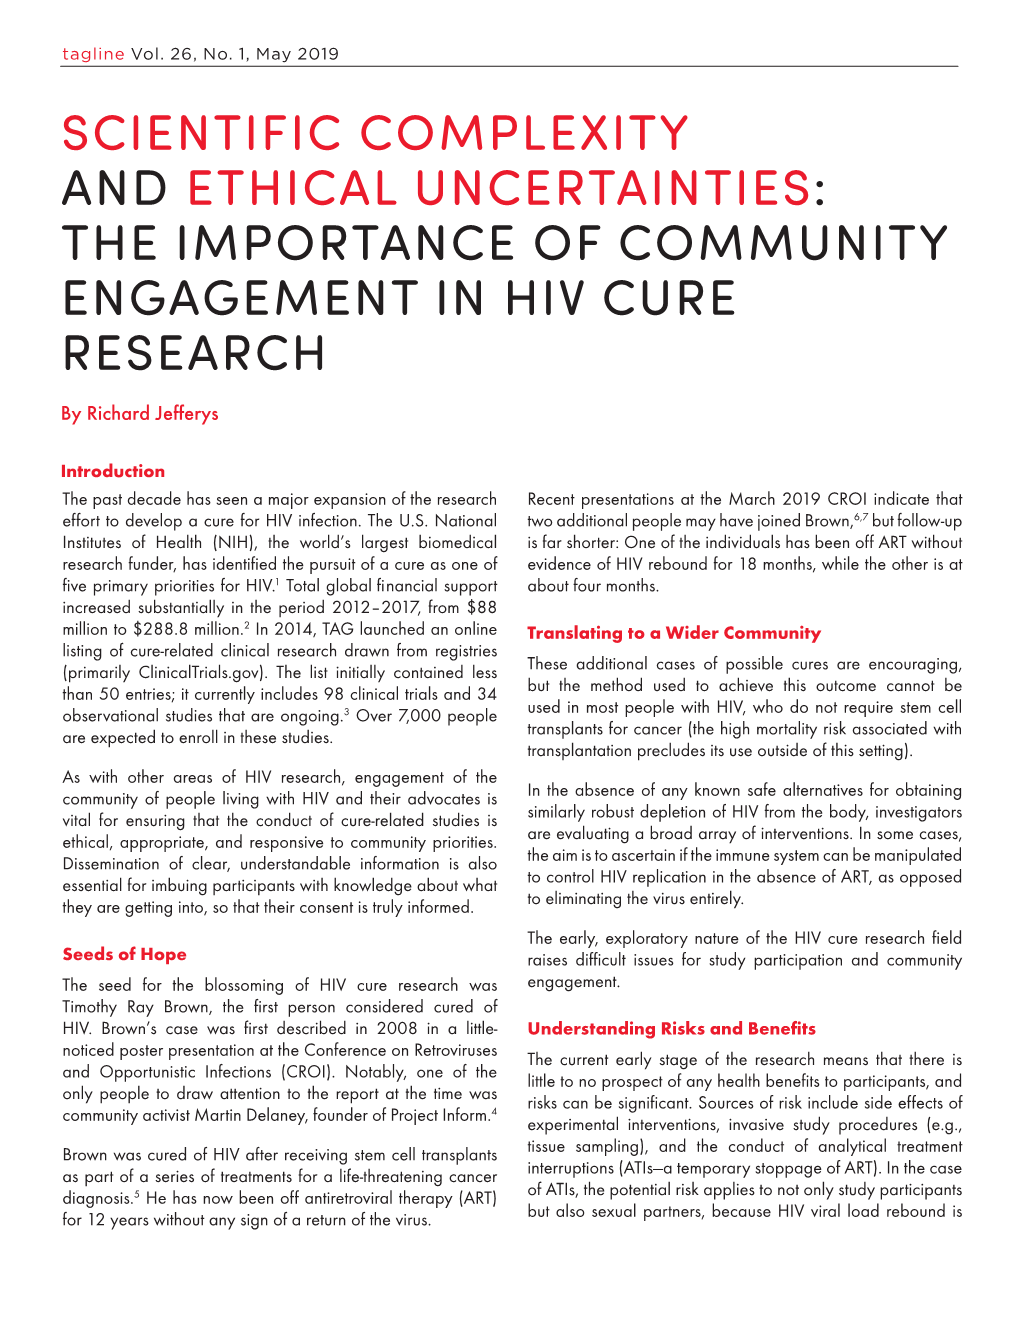 The Importance of Community Engagement in Hiv Cure Research